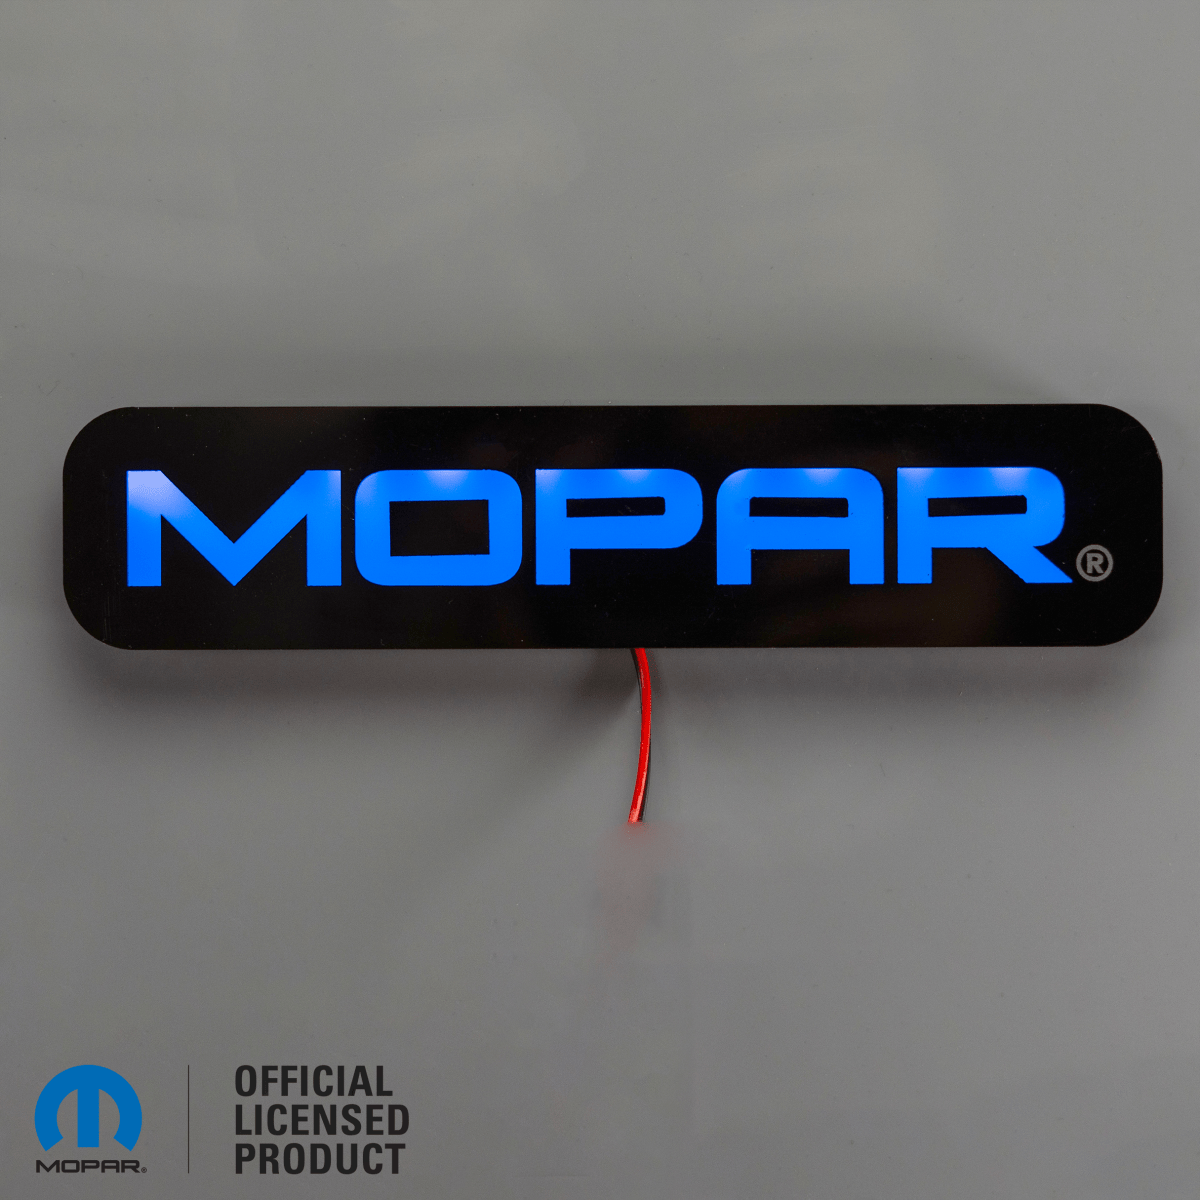 Mopar® LED Illuminated Badge - White or RGB - Grille or Body Mount -  Officially Licensed Product